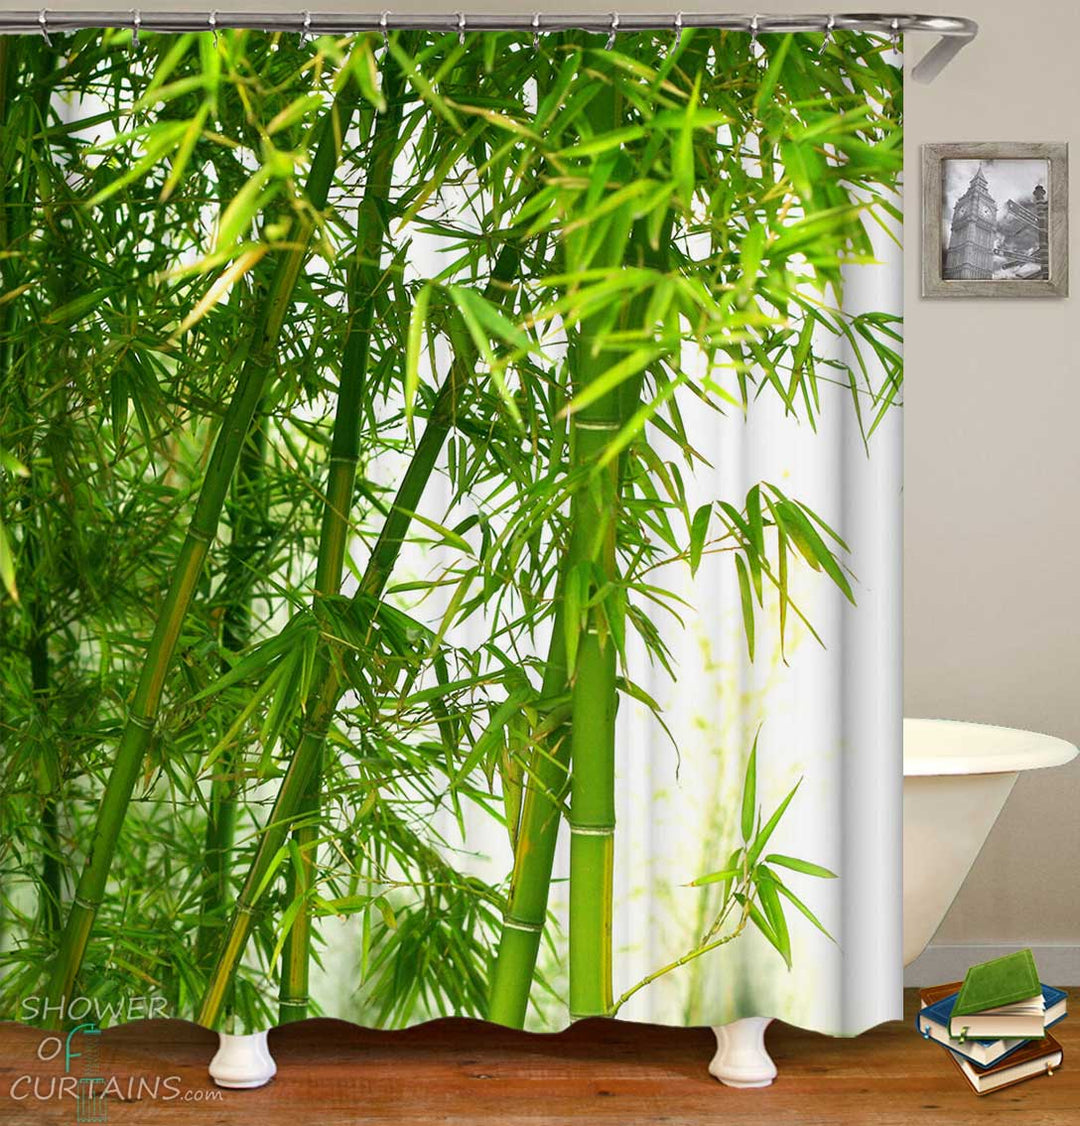 Shower Curtains with Fresh Green Bamboo